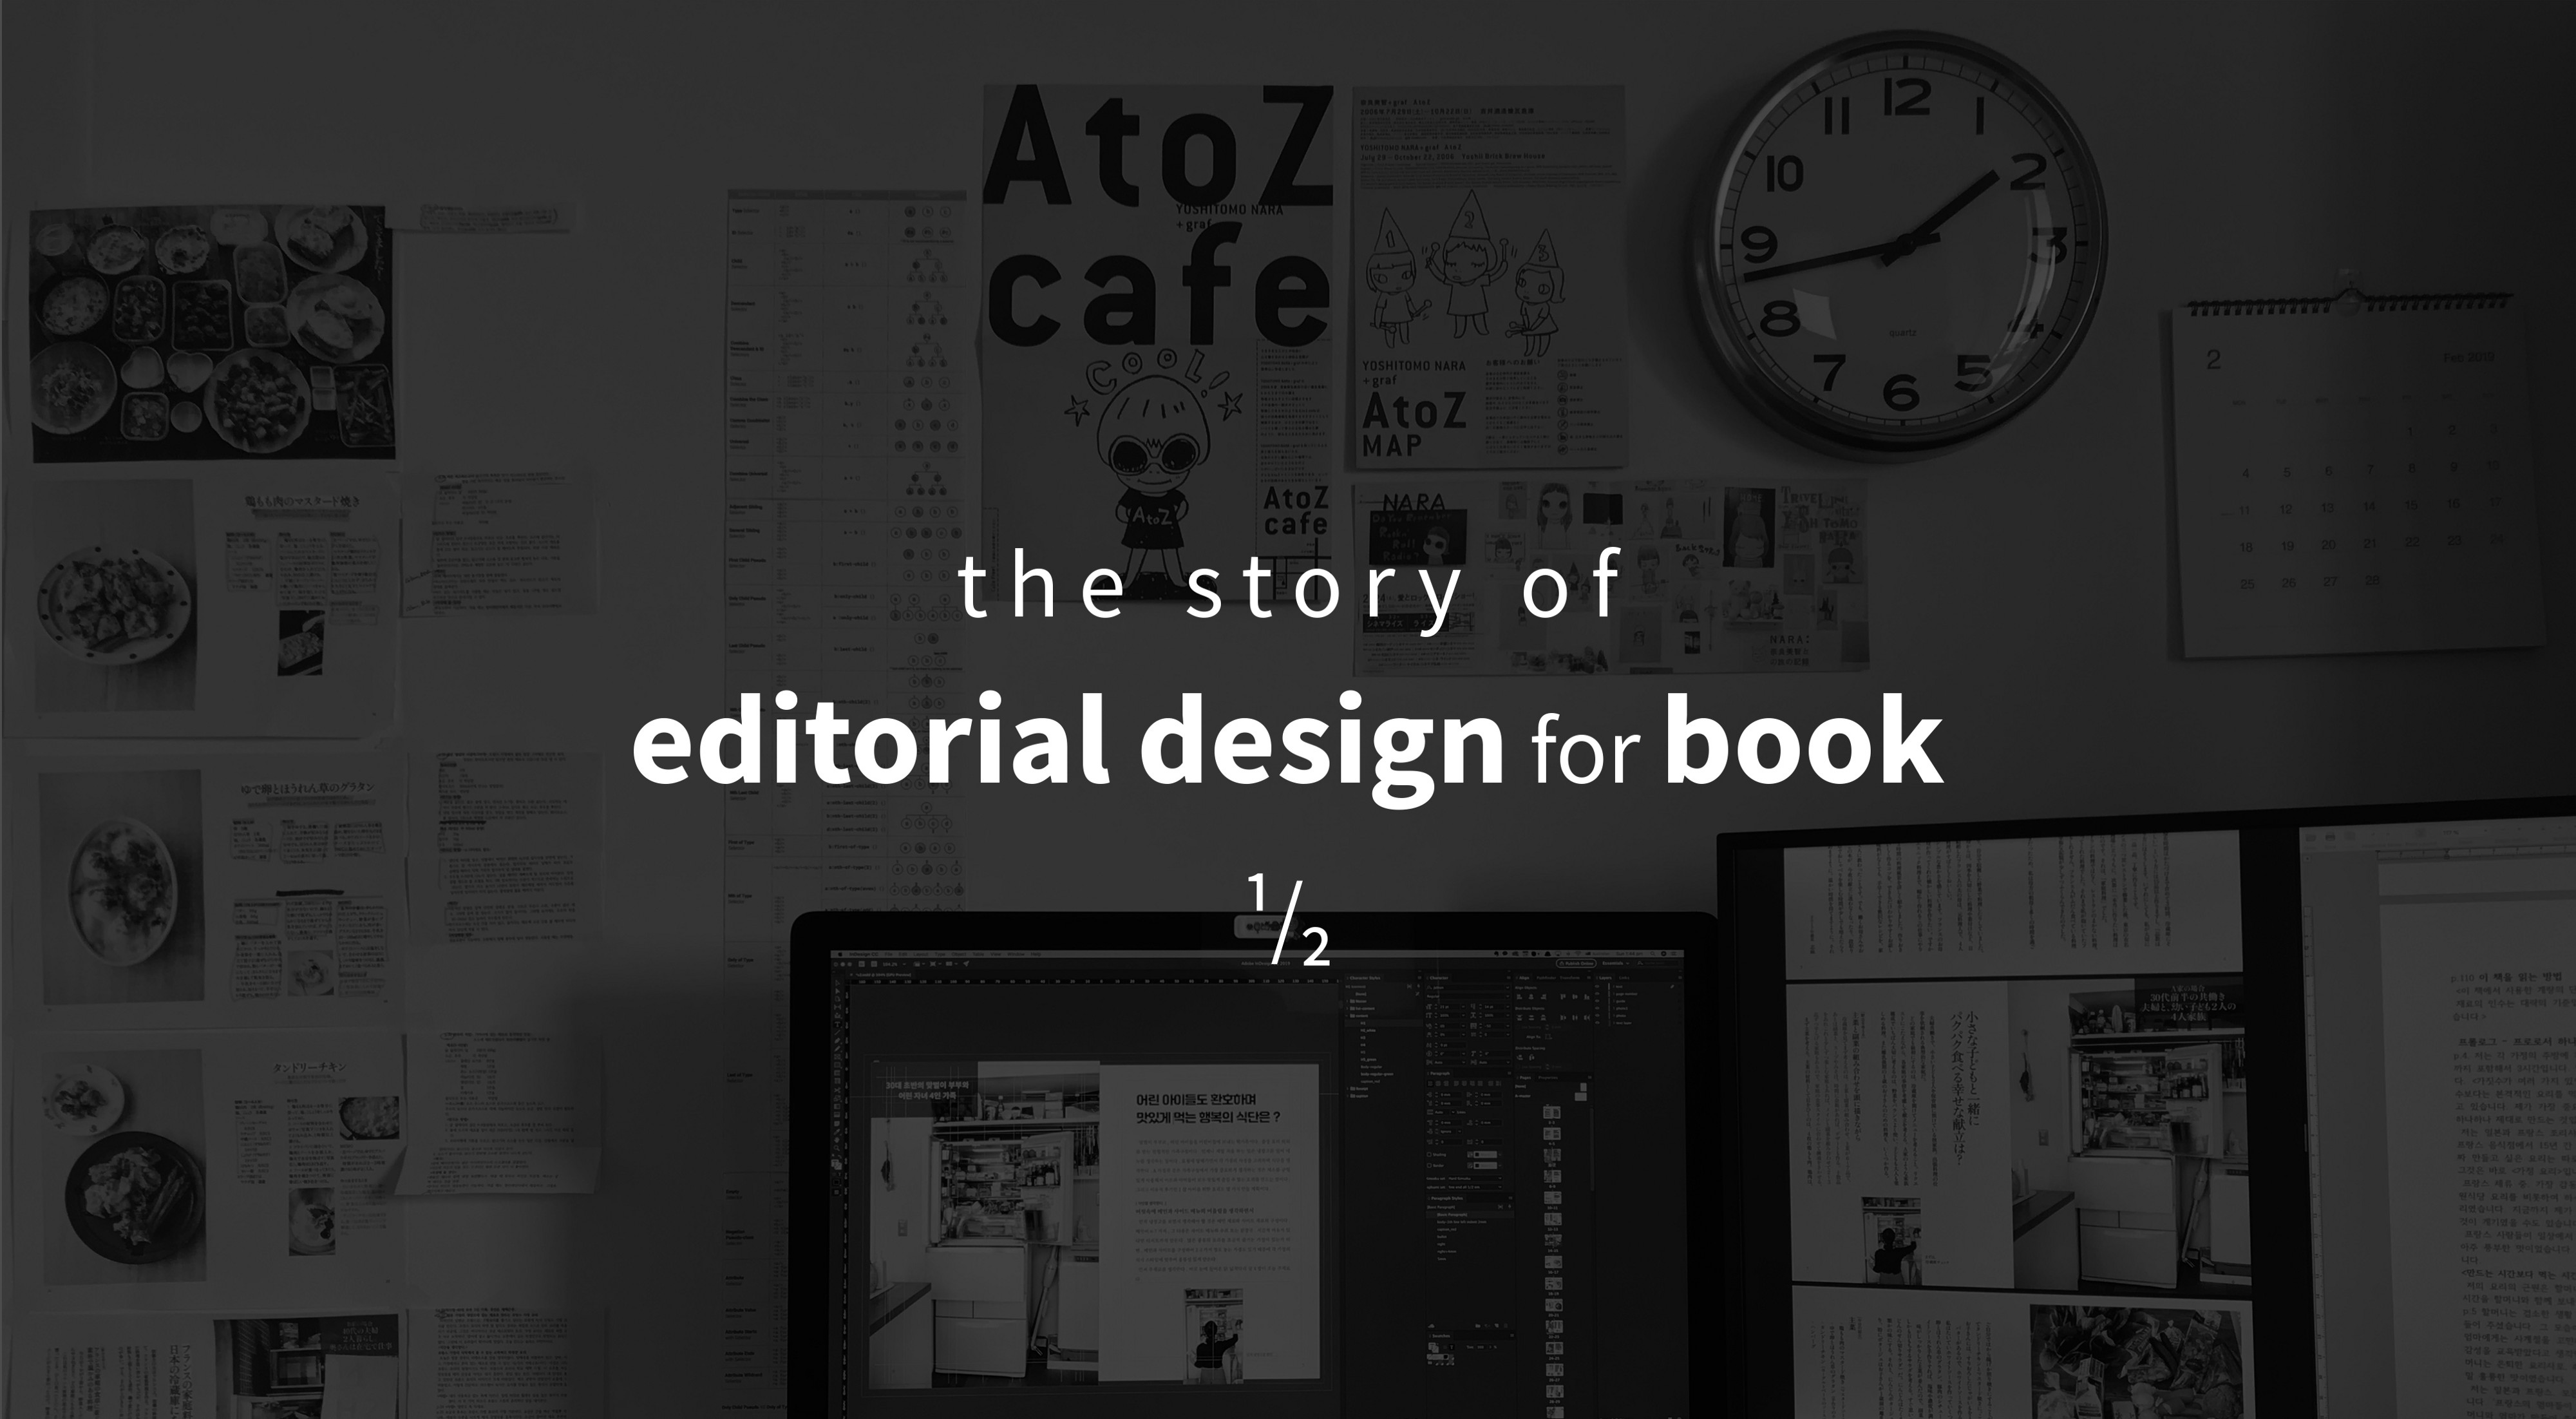 The story of editorial design for book ¹/₂: Cookbook